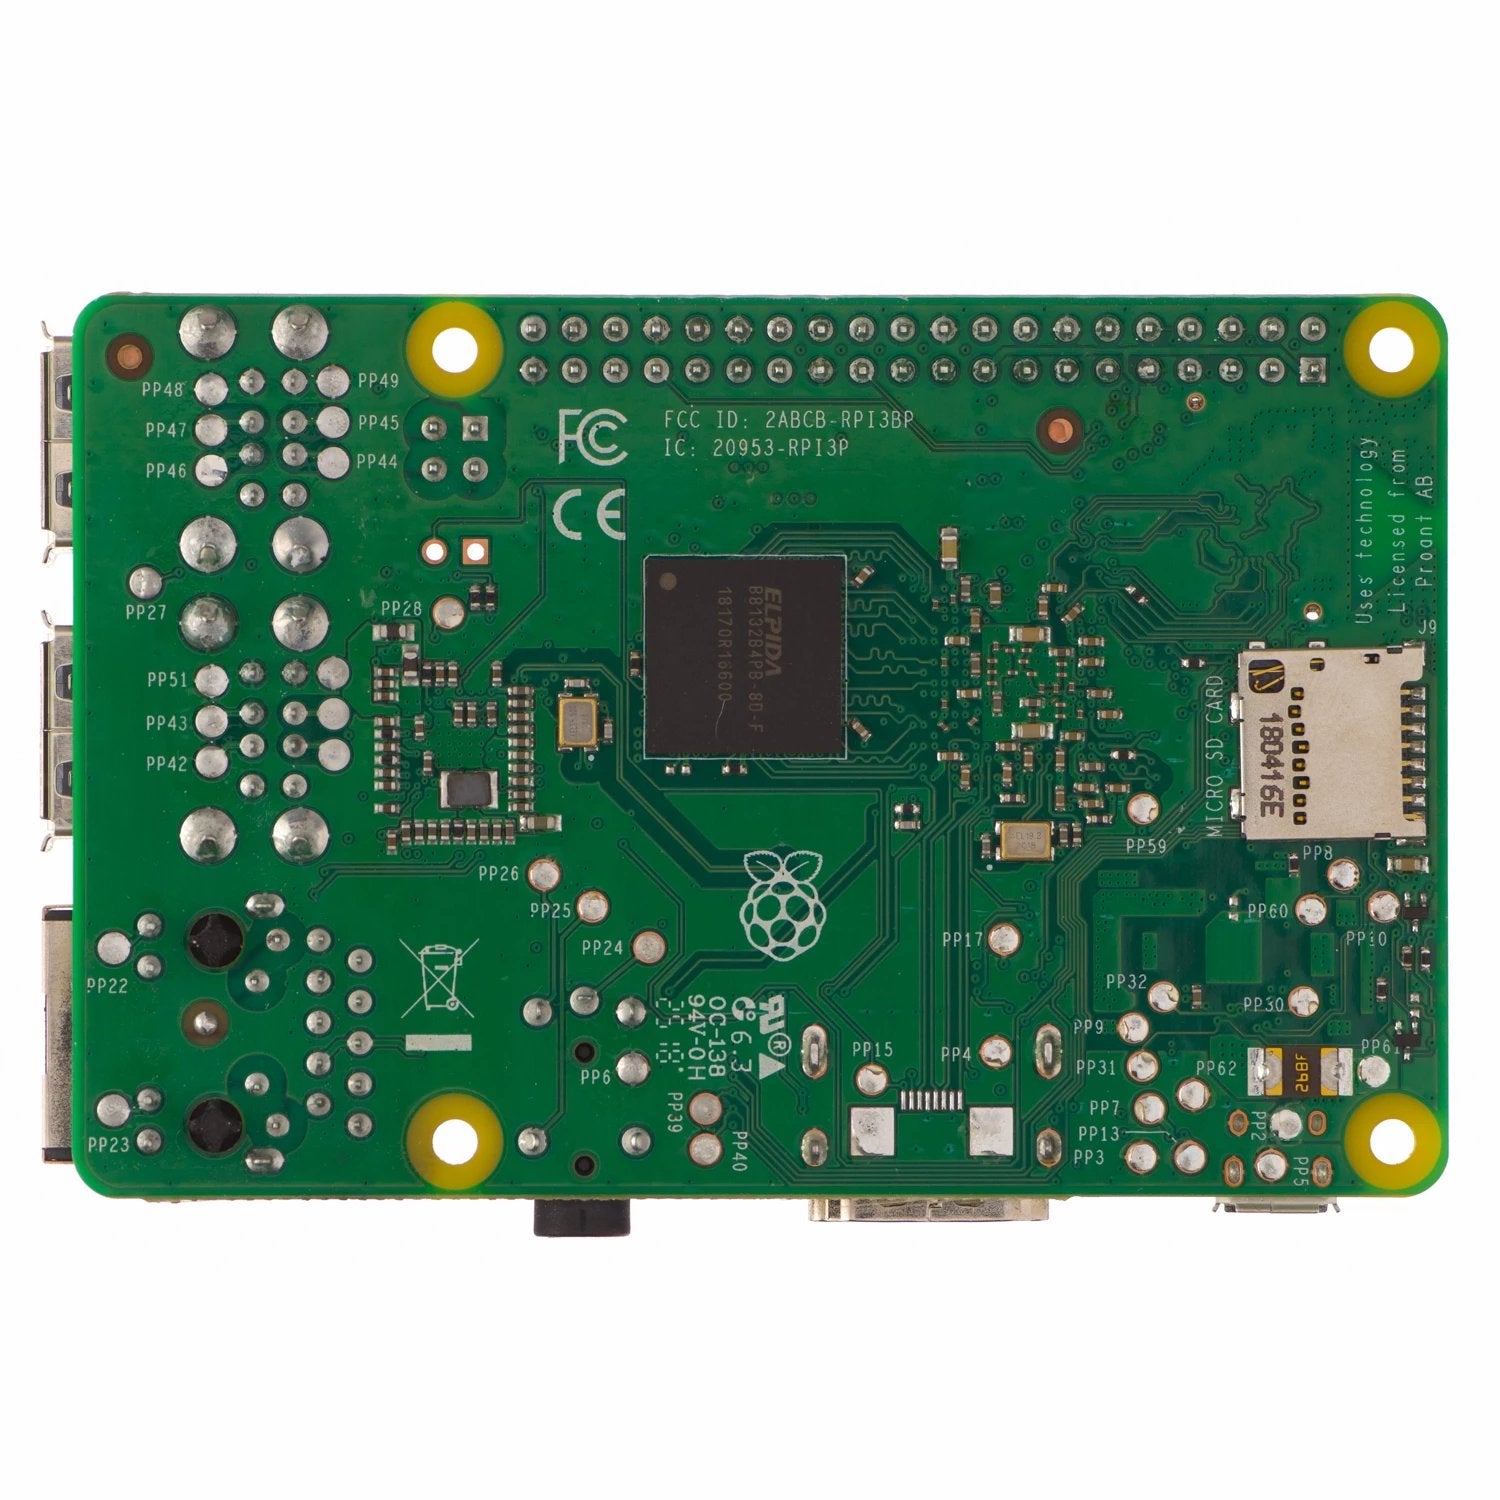 Raspberry Pi 3 Model B+ with included NOOBS 32Gb micro SD card